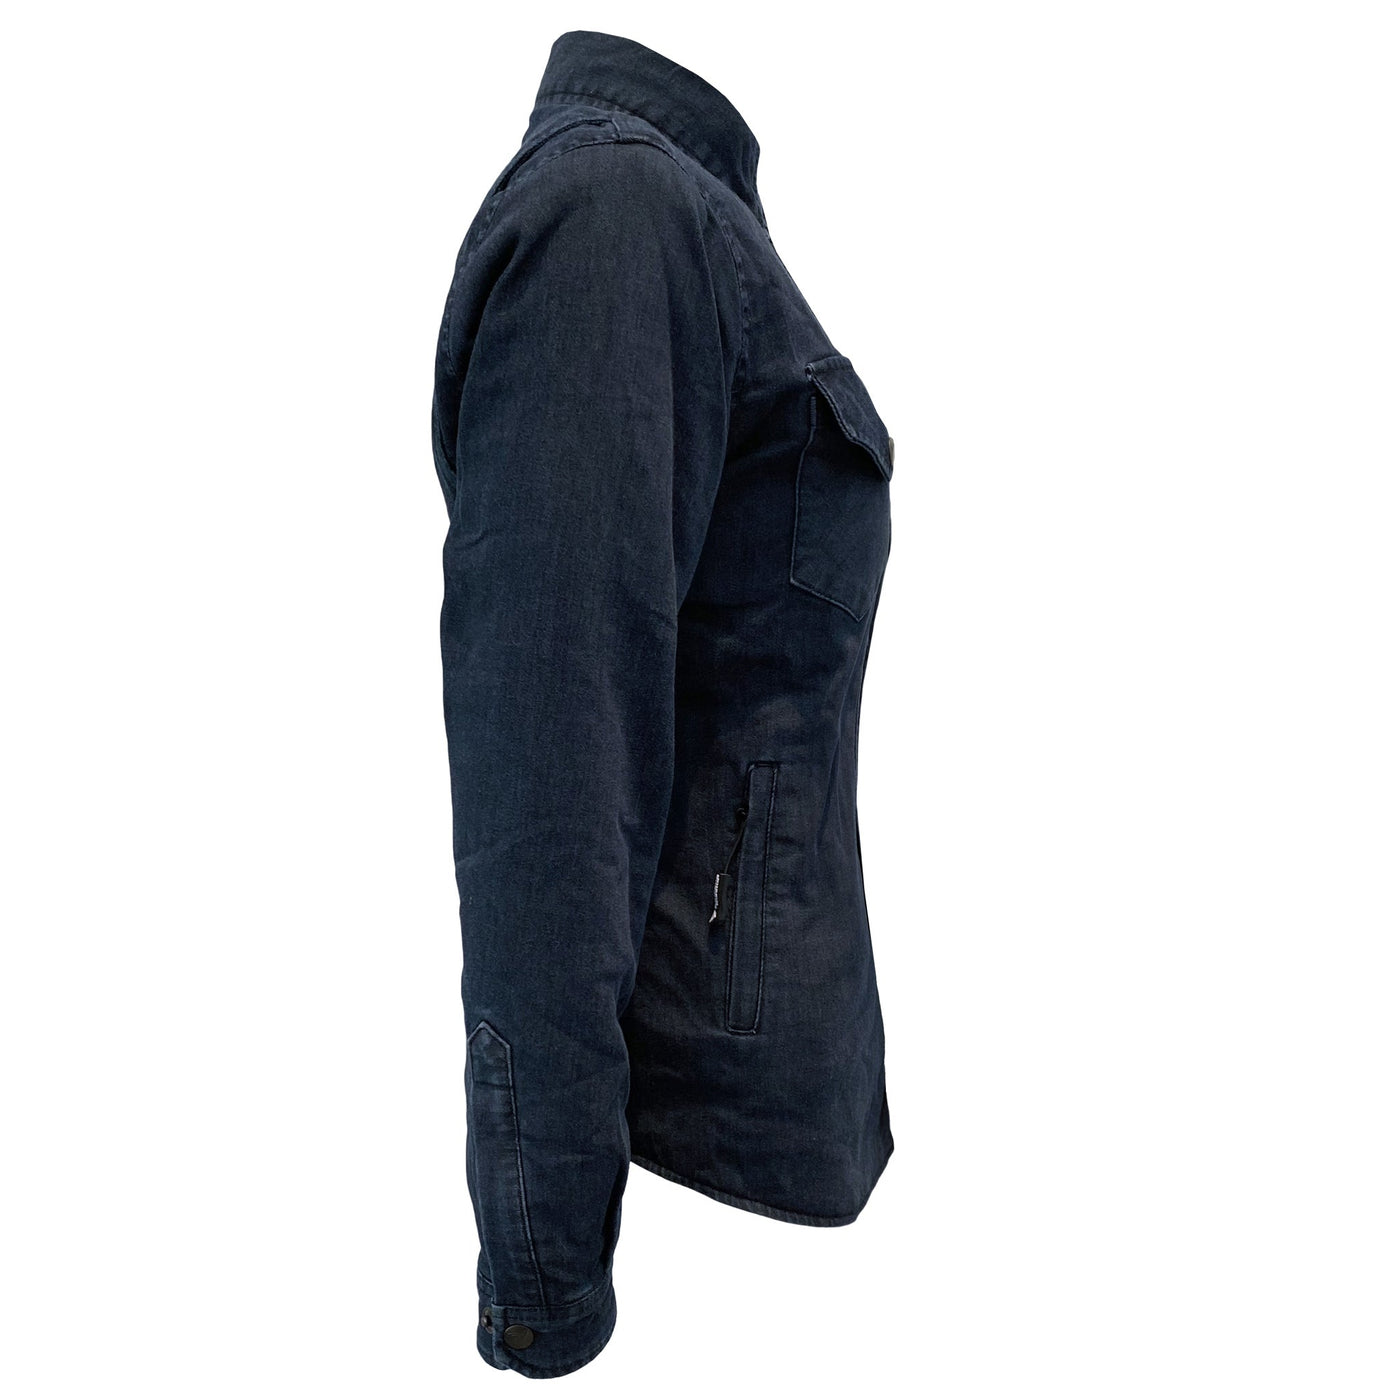 Protective Jeans Jacket with Pads for Women - Indigo Blue